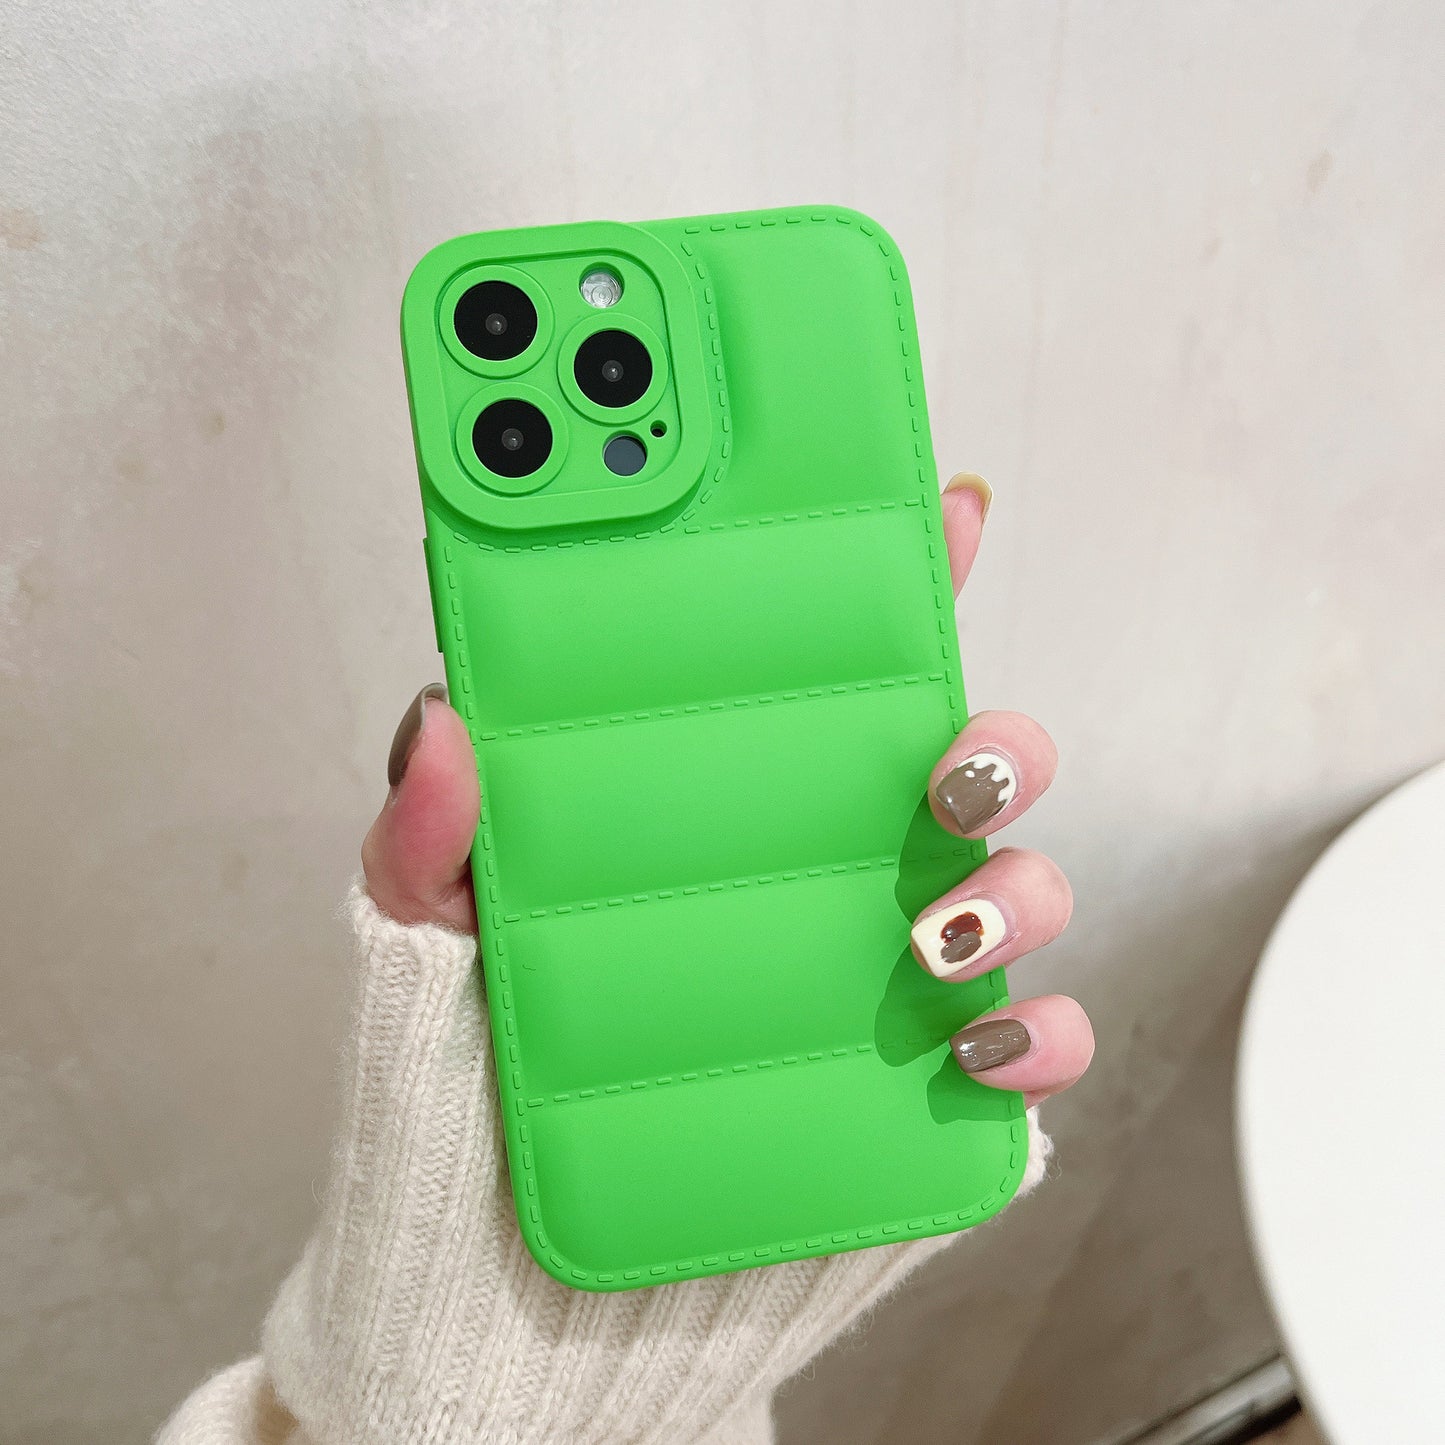 The Puffer Case 2.0/New Limited Edition Colors